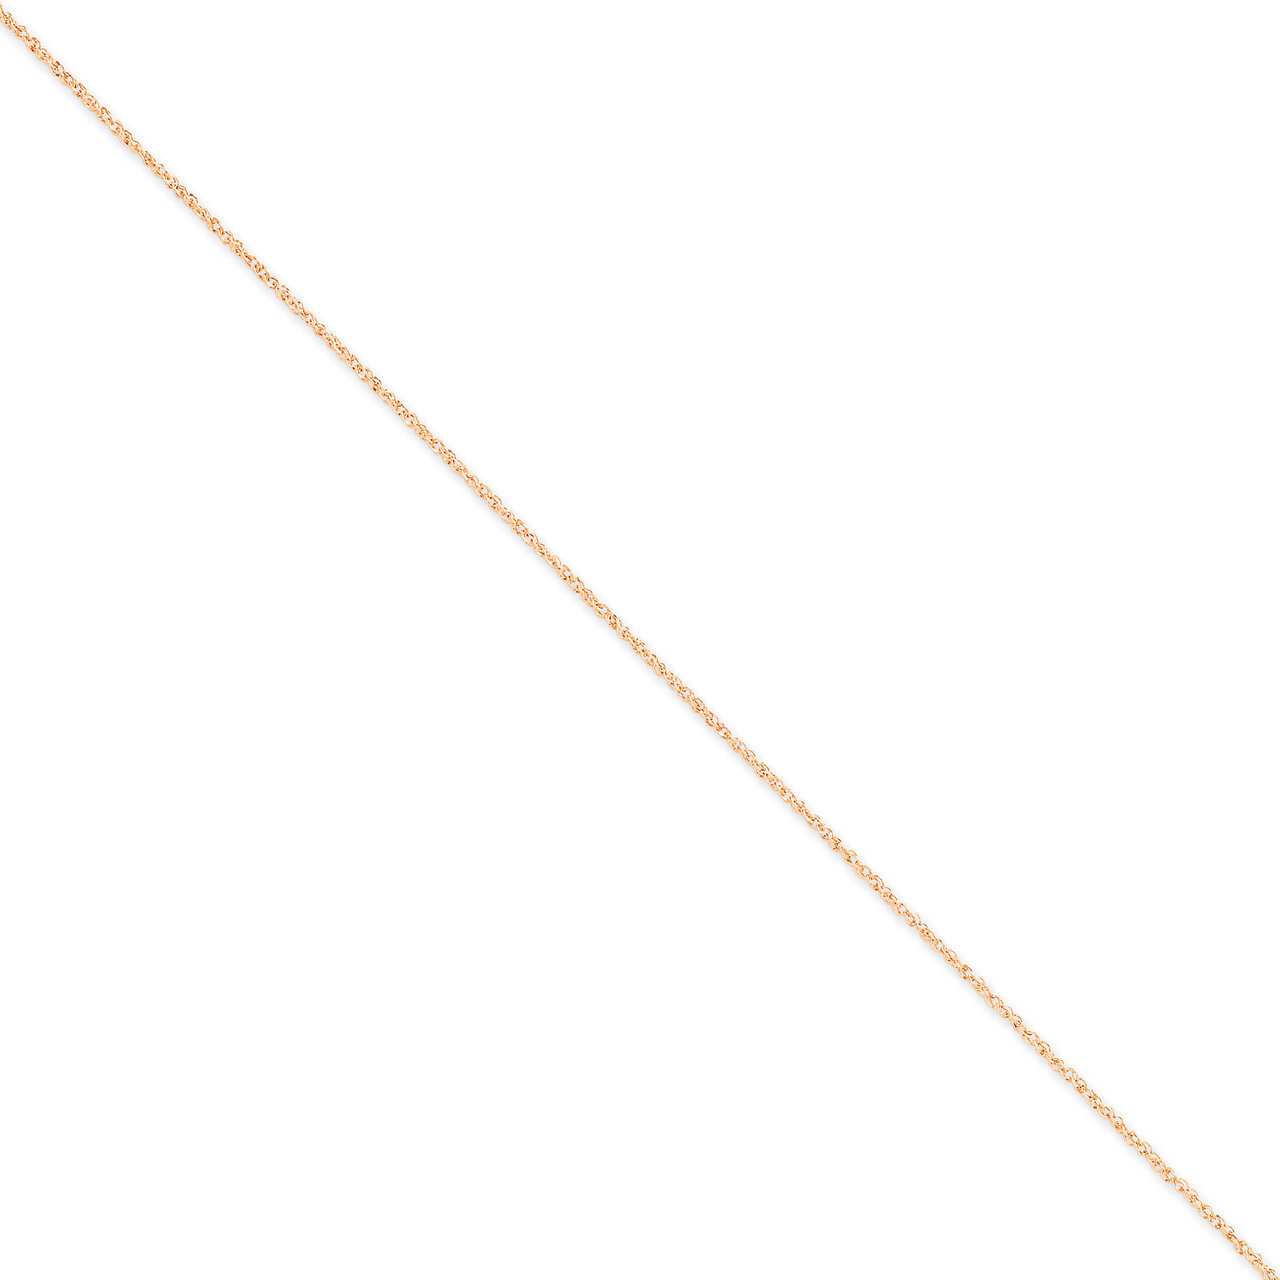 1.1mm Ropa Chain 20 Inch 14k Rose Gold RSC27-20